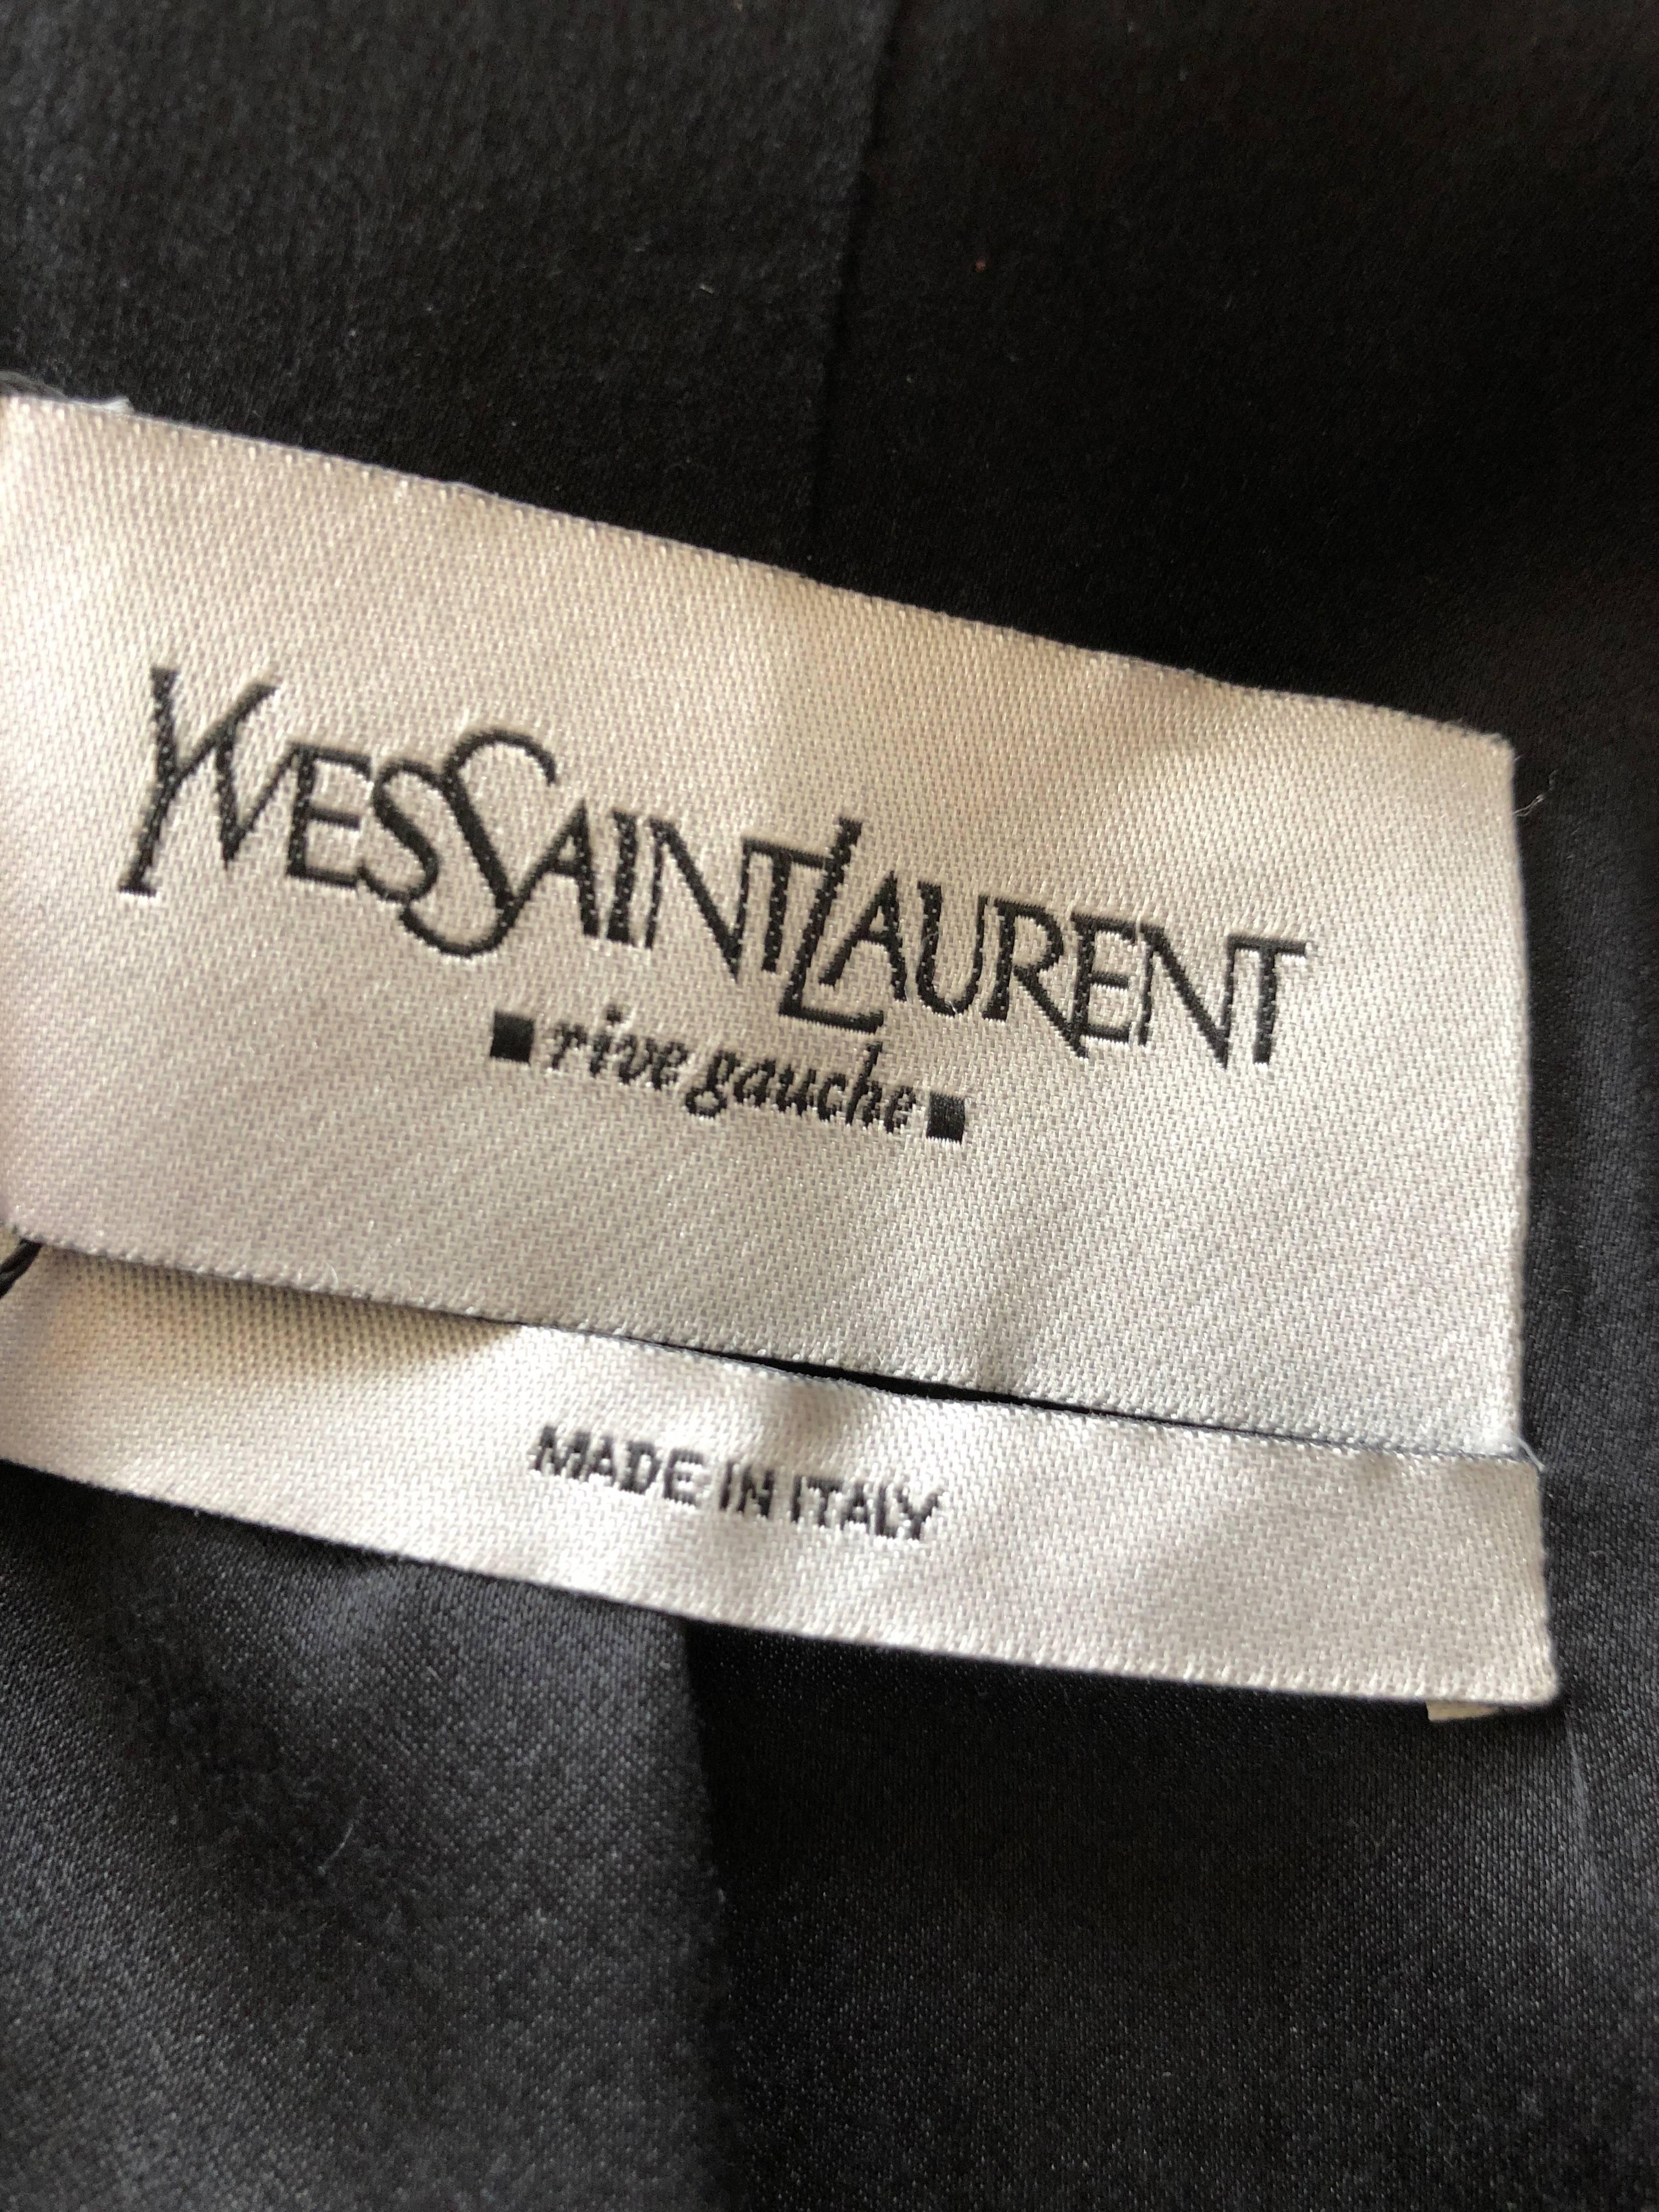 Yves Saint Laurent by Tom Ford Black Wool Ruffle Front Coat from Fall 2004 For Sale 3